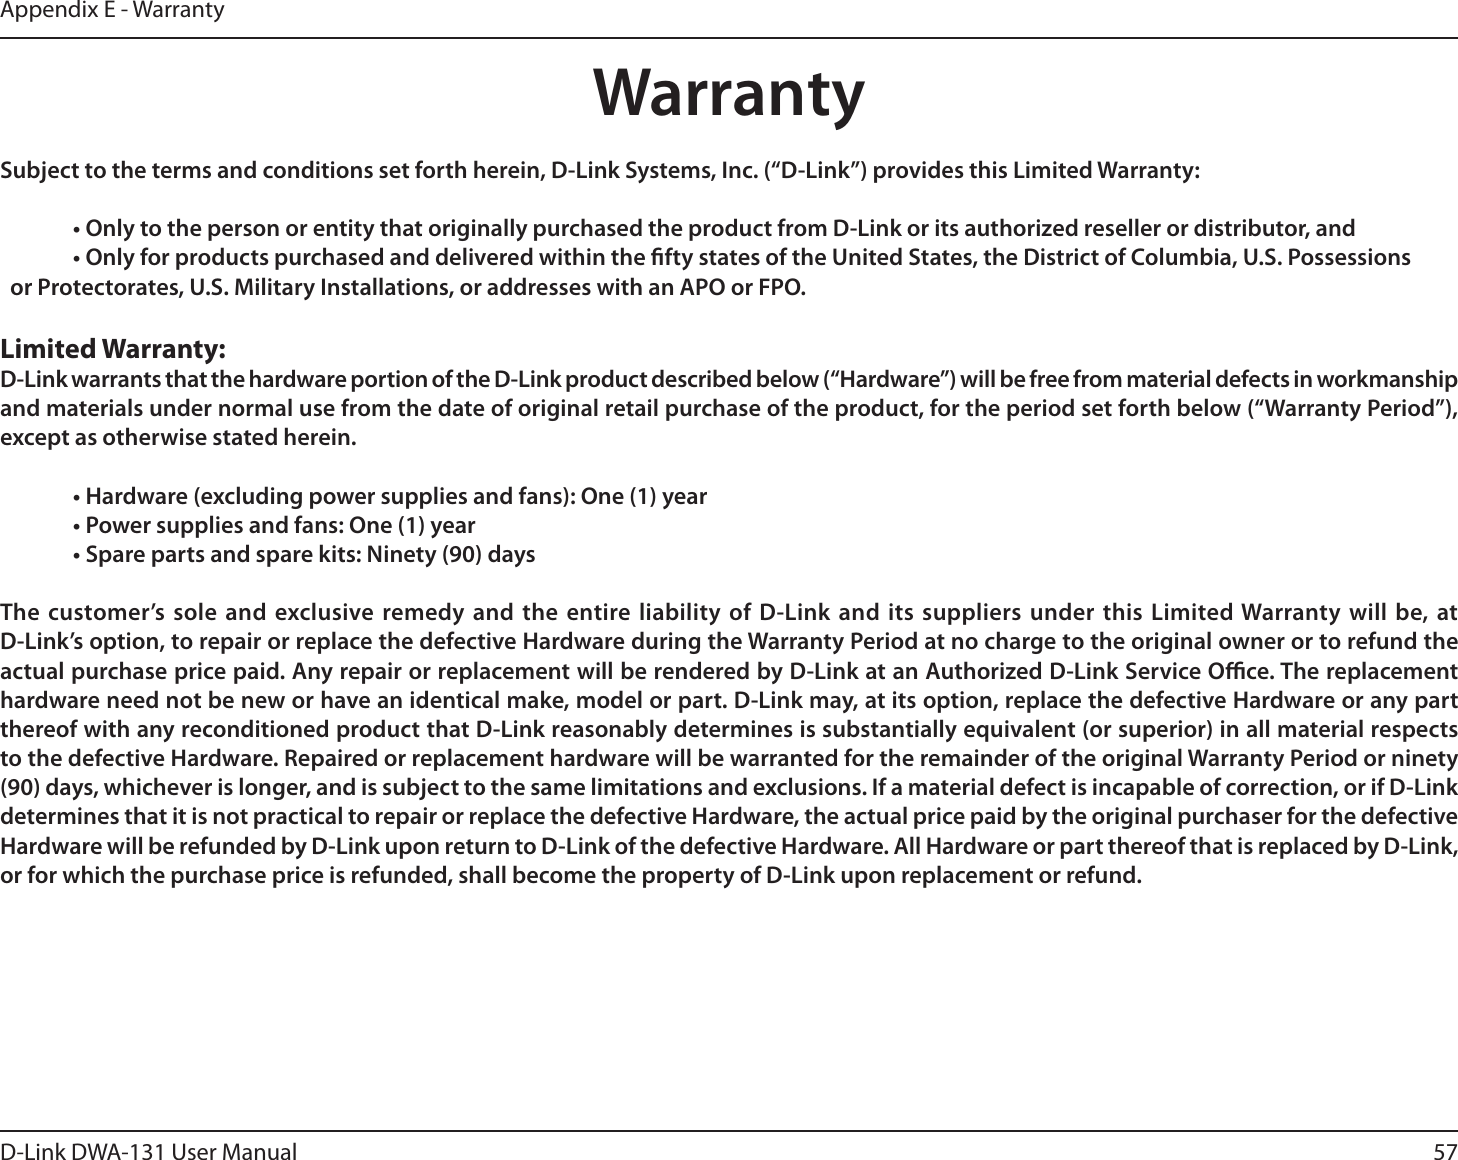 57D-Link DWA-131 User ManualAppendix E - WarrantyWarrantySubject to the terms and conditions set forth herein, D-Link Systems, Inc. (“D-Link”) provides this Limited Warranty:  • Only to the person or entity that originally purchased the product from D-Link or its authorized reseller or distributor, and  • Only for products purchased and delivered within the fty states of the United States, the District of Columbia, U.S. Possessions      or Protectorates, U.S. Military Installations, or addresses with an APO or FPO.Limited Warranty:D-Link warrants that the hardware portion of the D-Link product described below (“Hardware”) will be free from material defects in workmanship and materials under normal use from the date of original retail purchase of the product, for the period set forth below (“Warranty Period”), except as otherwise stated herein.  • Hardware (excluding power supplies and fans): One (1) year  • Power supplies and fans: One (1) year  • Spare parts and spare kits: Ninety (90) daysThe customer’s sole and exclusive remedy and the entire liability of D-Link and its suppliers under this Limited Warranty will be, at  D-Link’s option, to repair or replace the defective Hardware during the Warranty Period at no charge to the original owner or to refund the actual purchase price paid. Any repair or replacement will be rendered by D-Link at an Authorized D-Link Service Oce. The replacement hardware need not be new or have an identical make, model or part. D-Link may, at its option, replace the defective Hardware or any part thereof with any reconditioned product that D-Link reasonably determines is substantially equivalent (or superior) in all material respects to the defective Hardware. Repaired or replacement hardware will be warranted for the remainder of the original Warranty Period or ninety (90) days, whichever is longer, and is subject to the same limitations and exclusions. If a material defect is incapable of correction, or if D-Link determines that it is not practical to repair or replace the defective Hardware, the actual price paid by the original purchaser for the defective Hardware will be refunded by D-Link upon return to D-Link of the defective Hardware. All Hardware or part thereof that is replaced by D-Link, or for which the purchase price is refunded, shall become the property of D-Link upon replacement or refund.